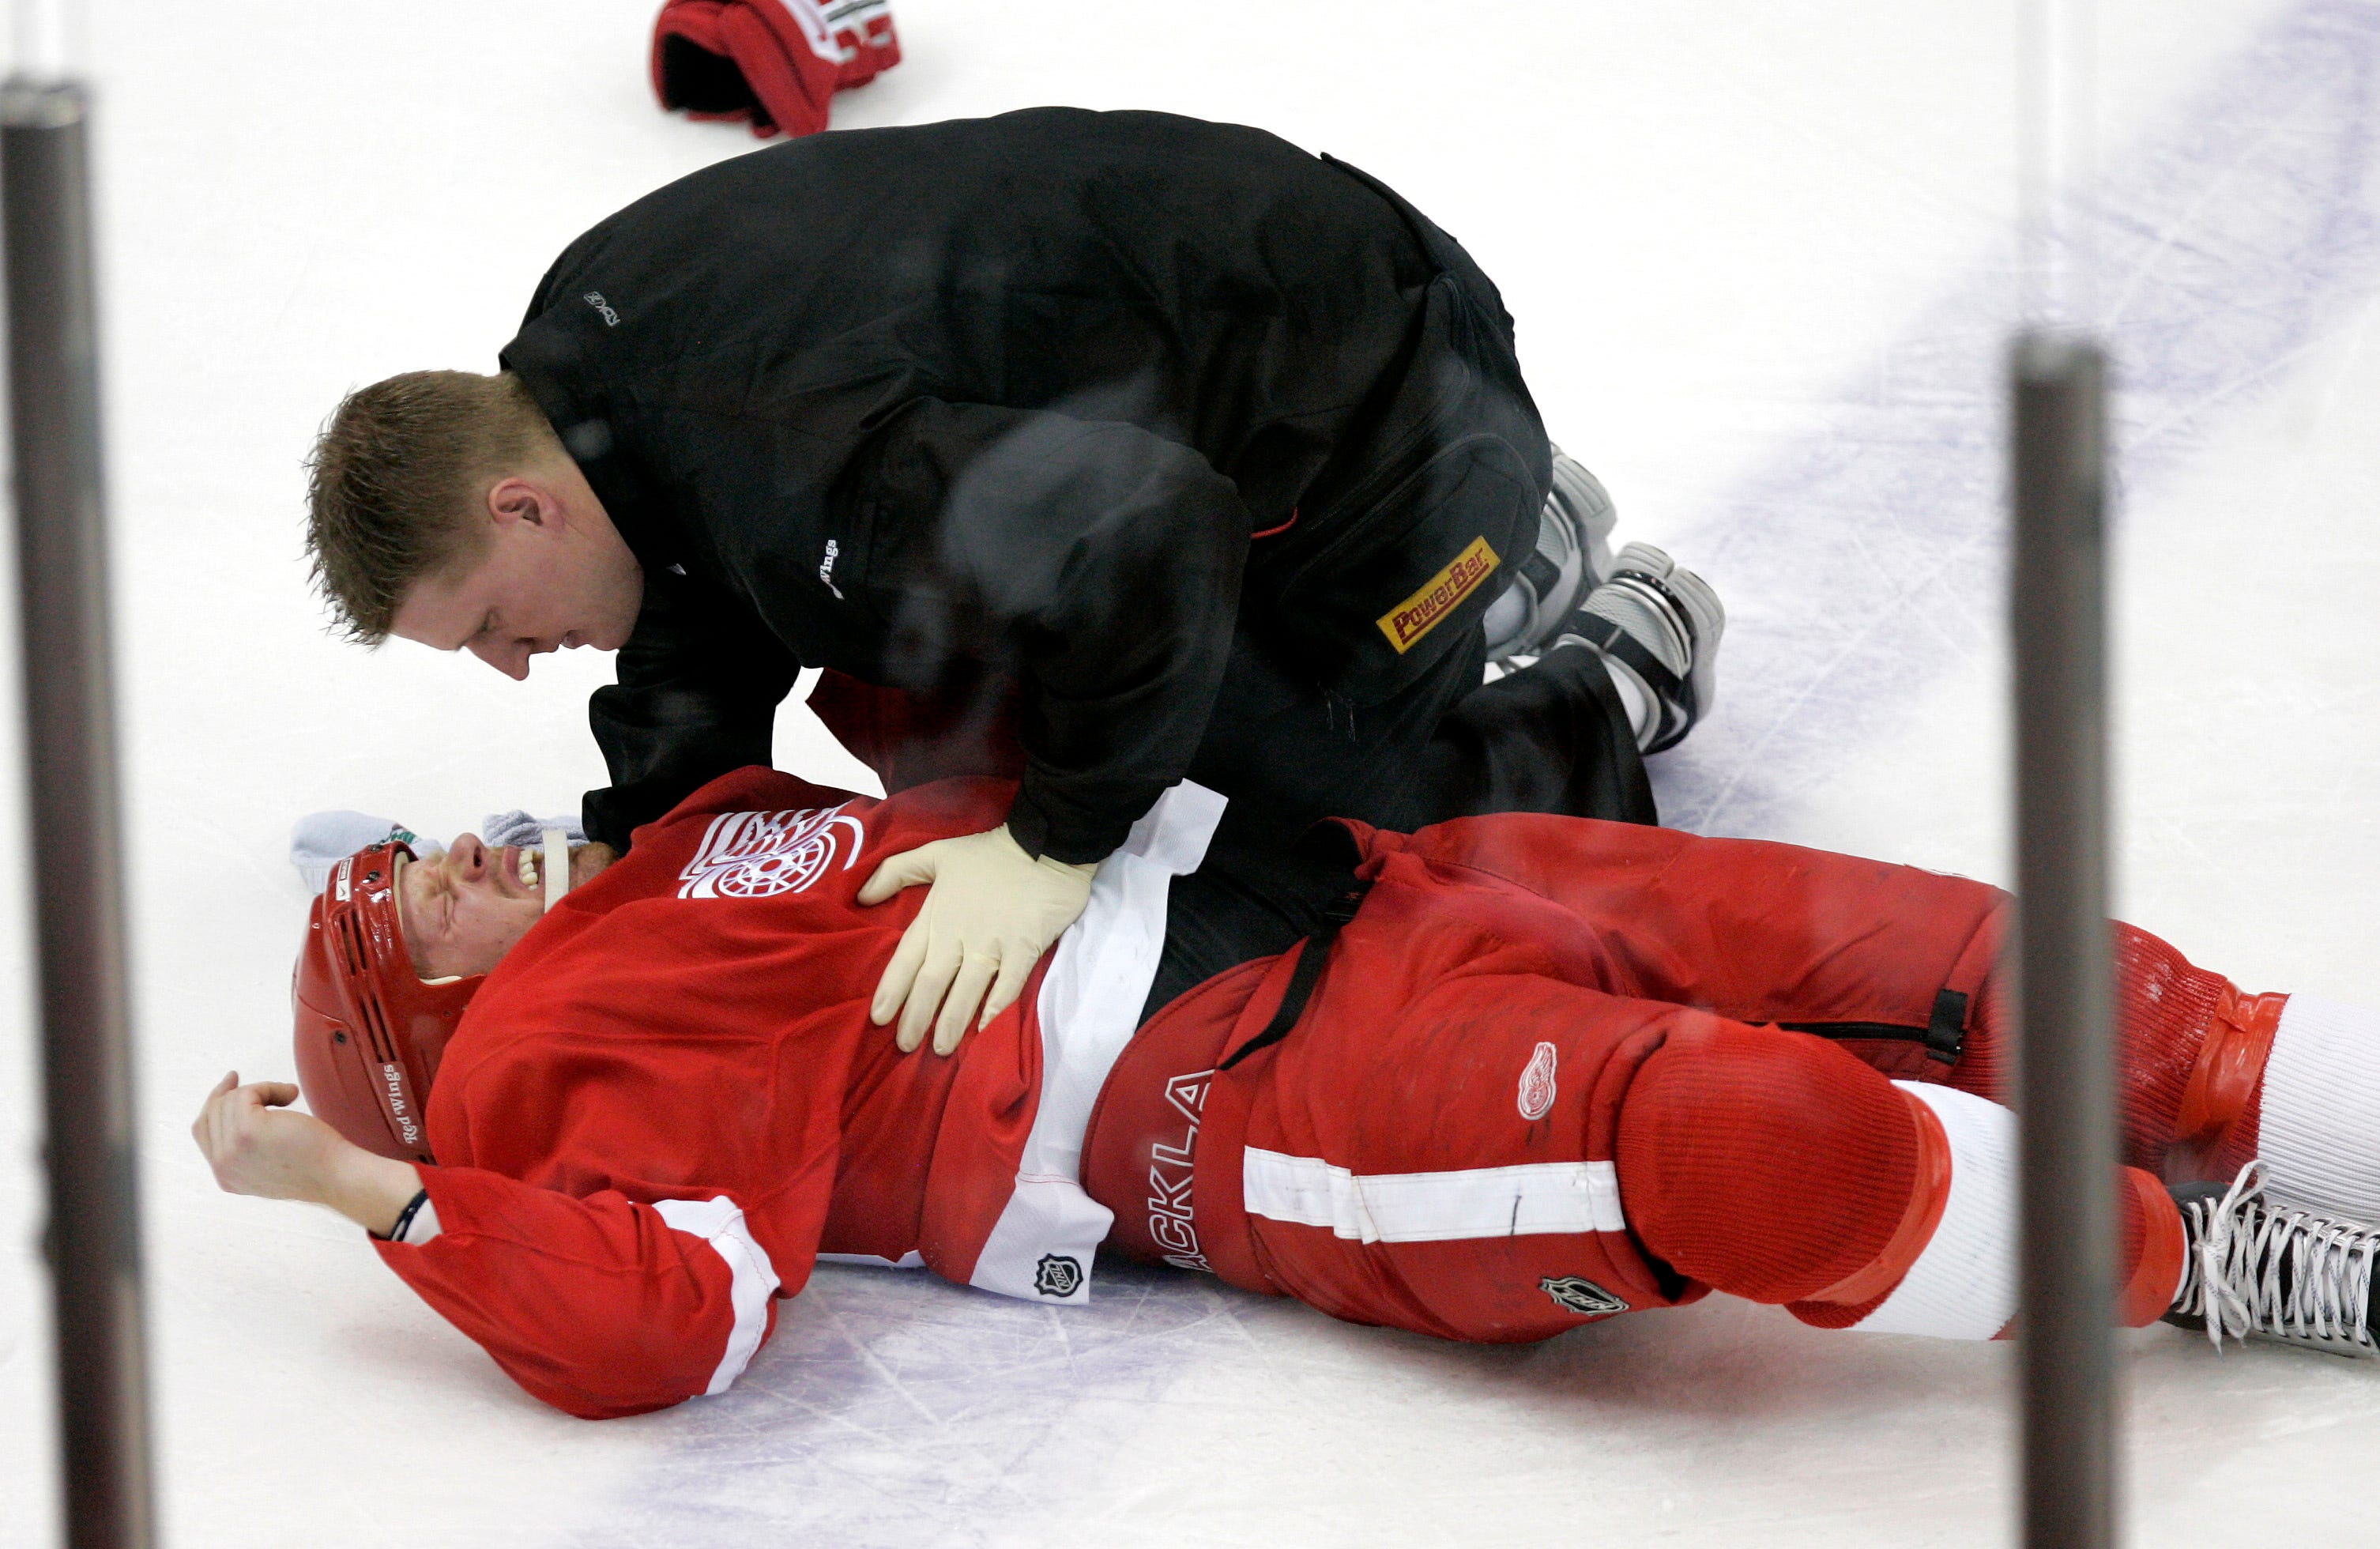 Former Red Wings player Johan Franzan continues to deal with the effects of concussions sustained during his NHL career.